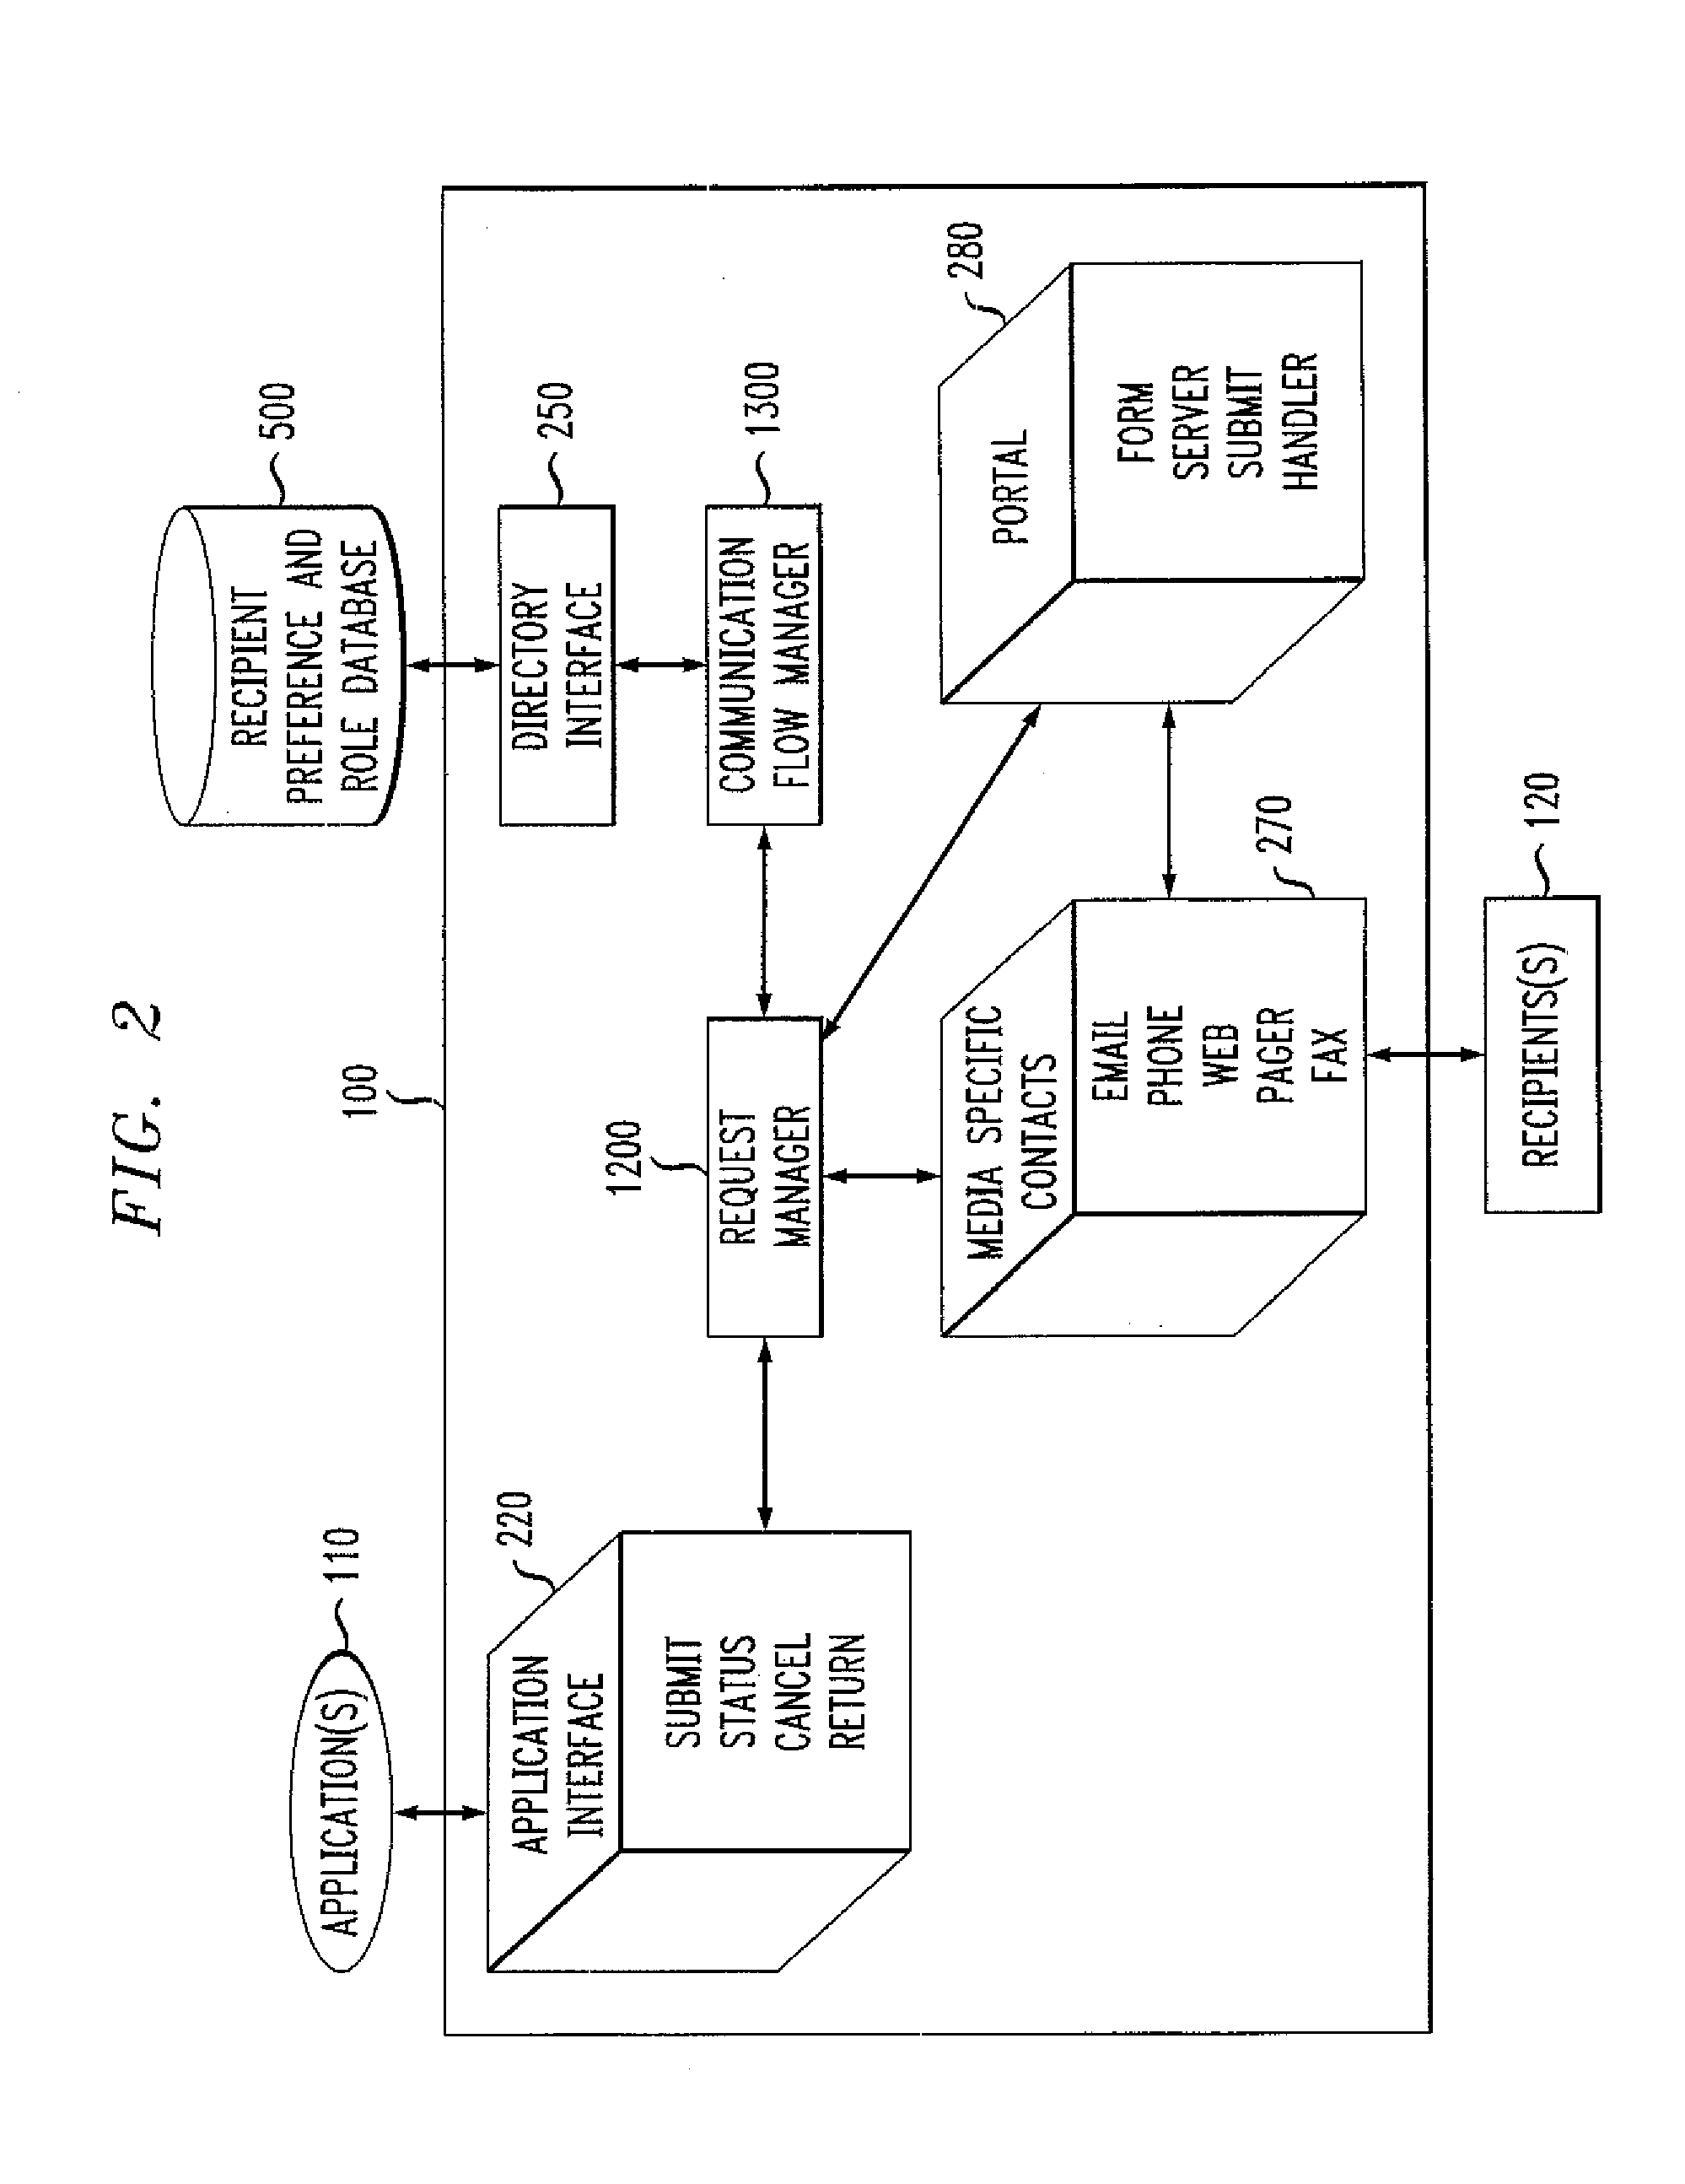 Method and Apparatus for Automatic Notification and Response